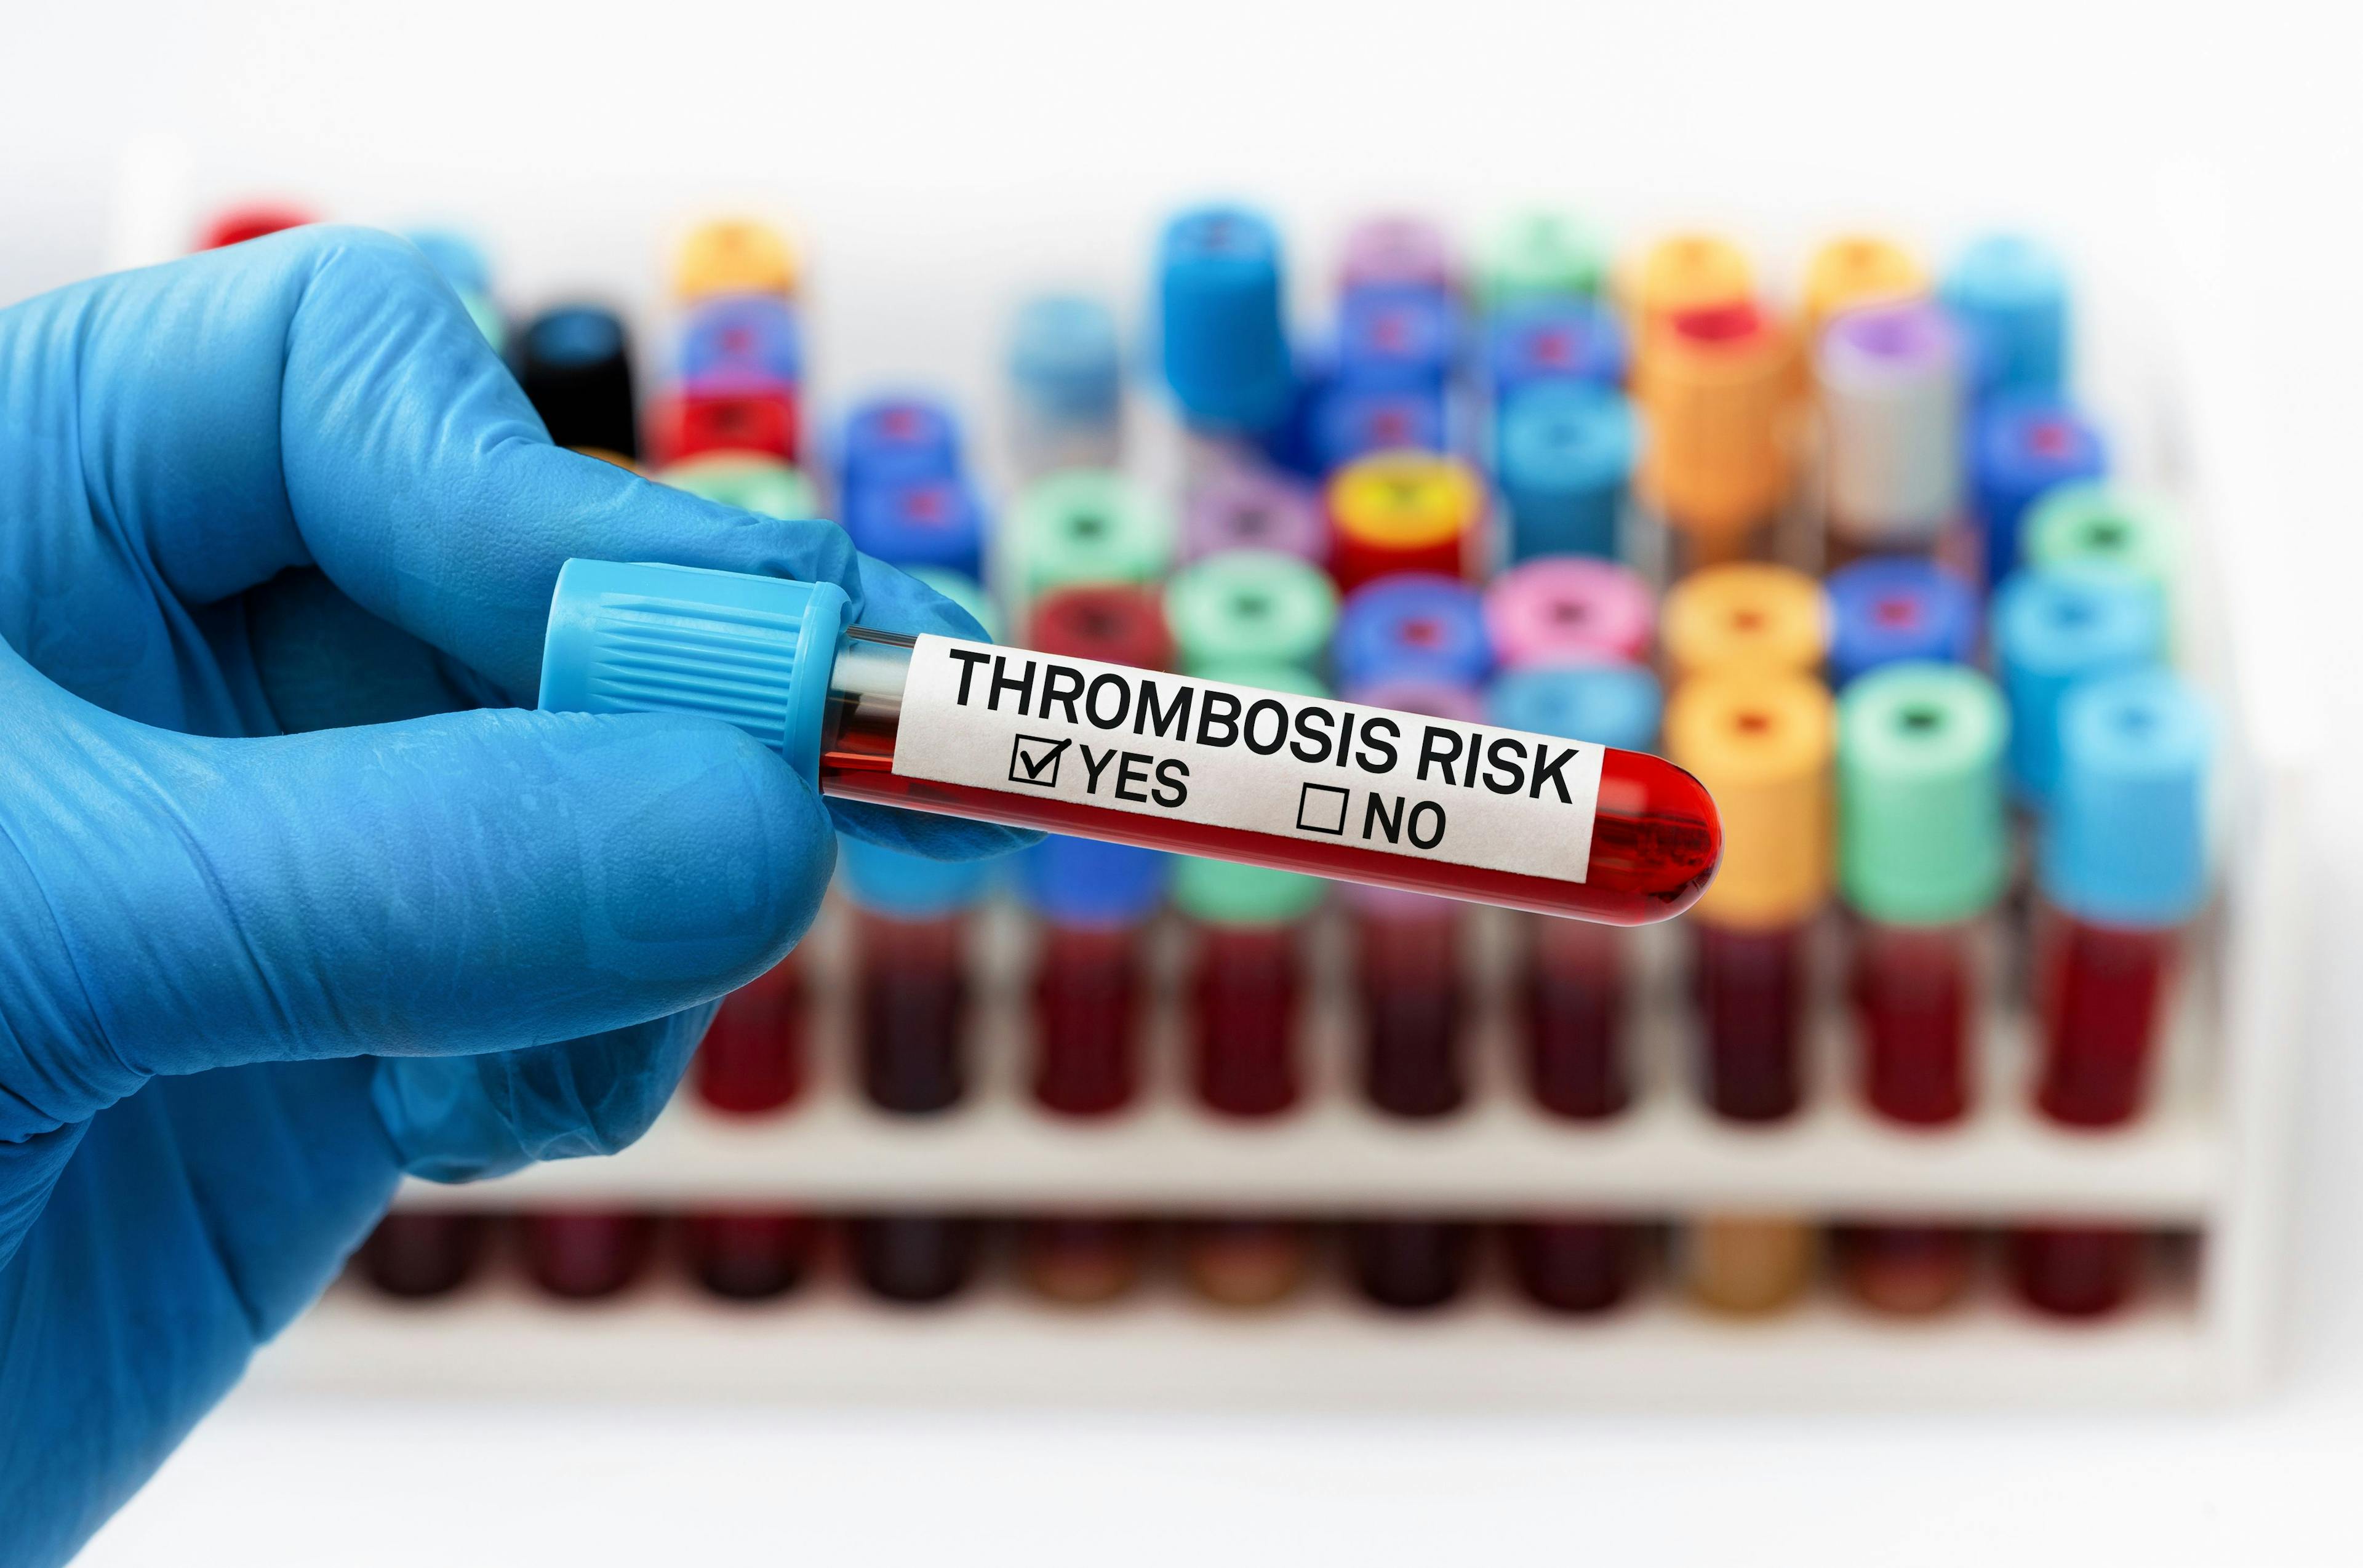 Blood sample test with positive diagnosis of thrombosis risk in a coagulation test | angellodeco - stock.adobe.com